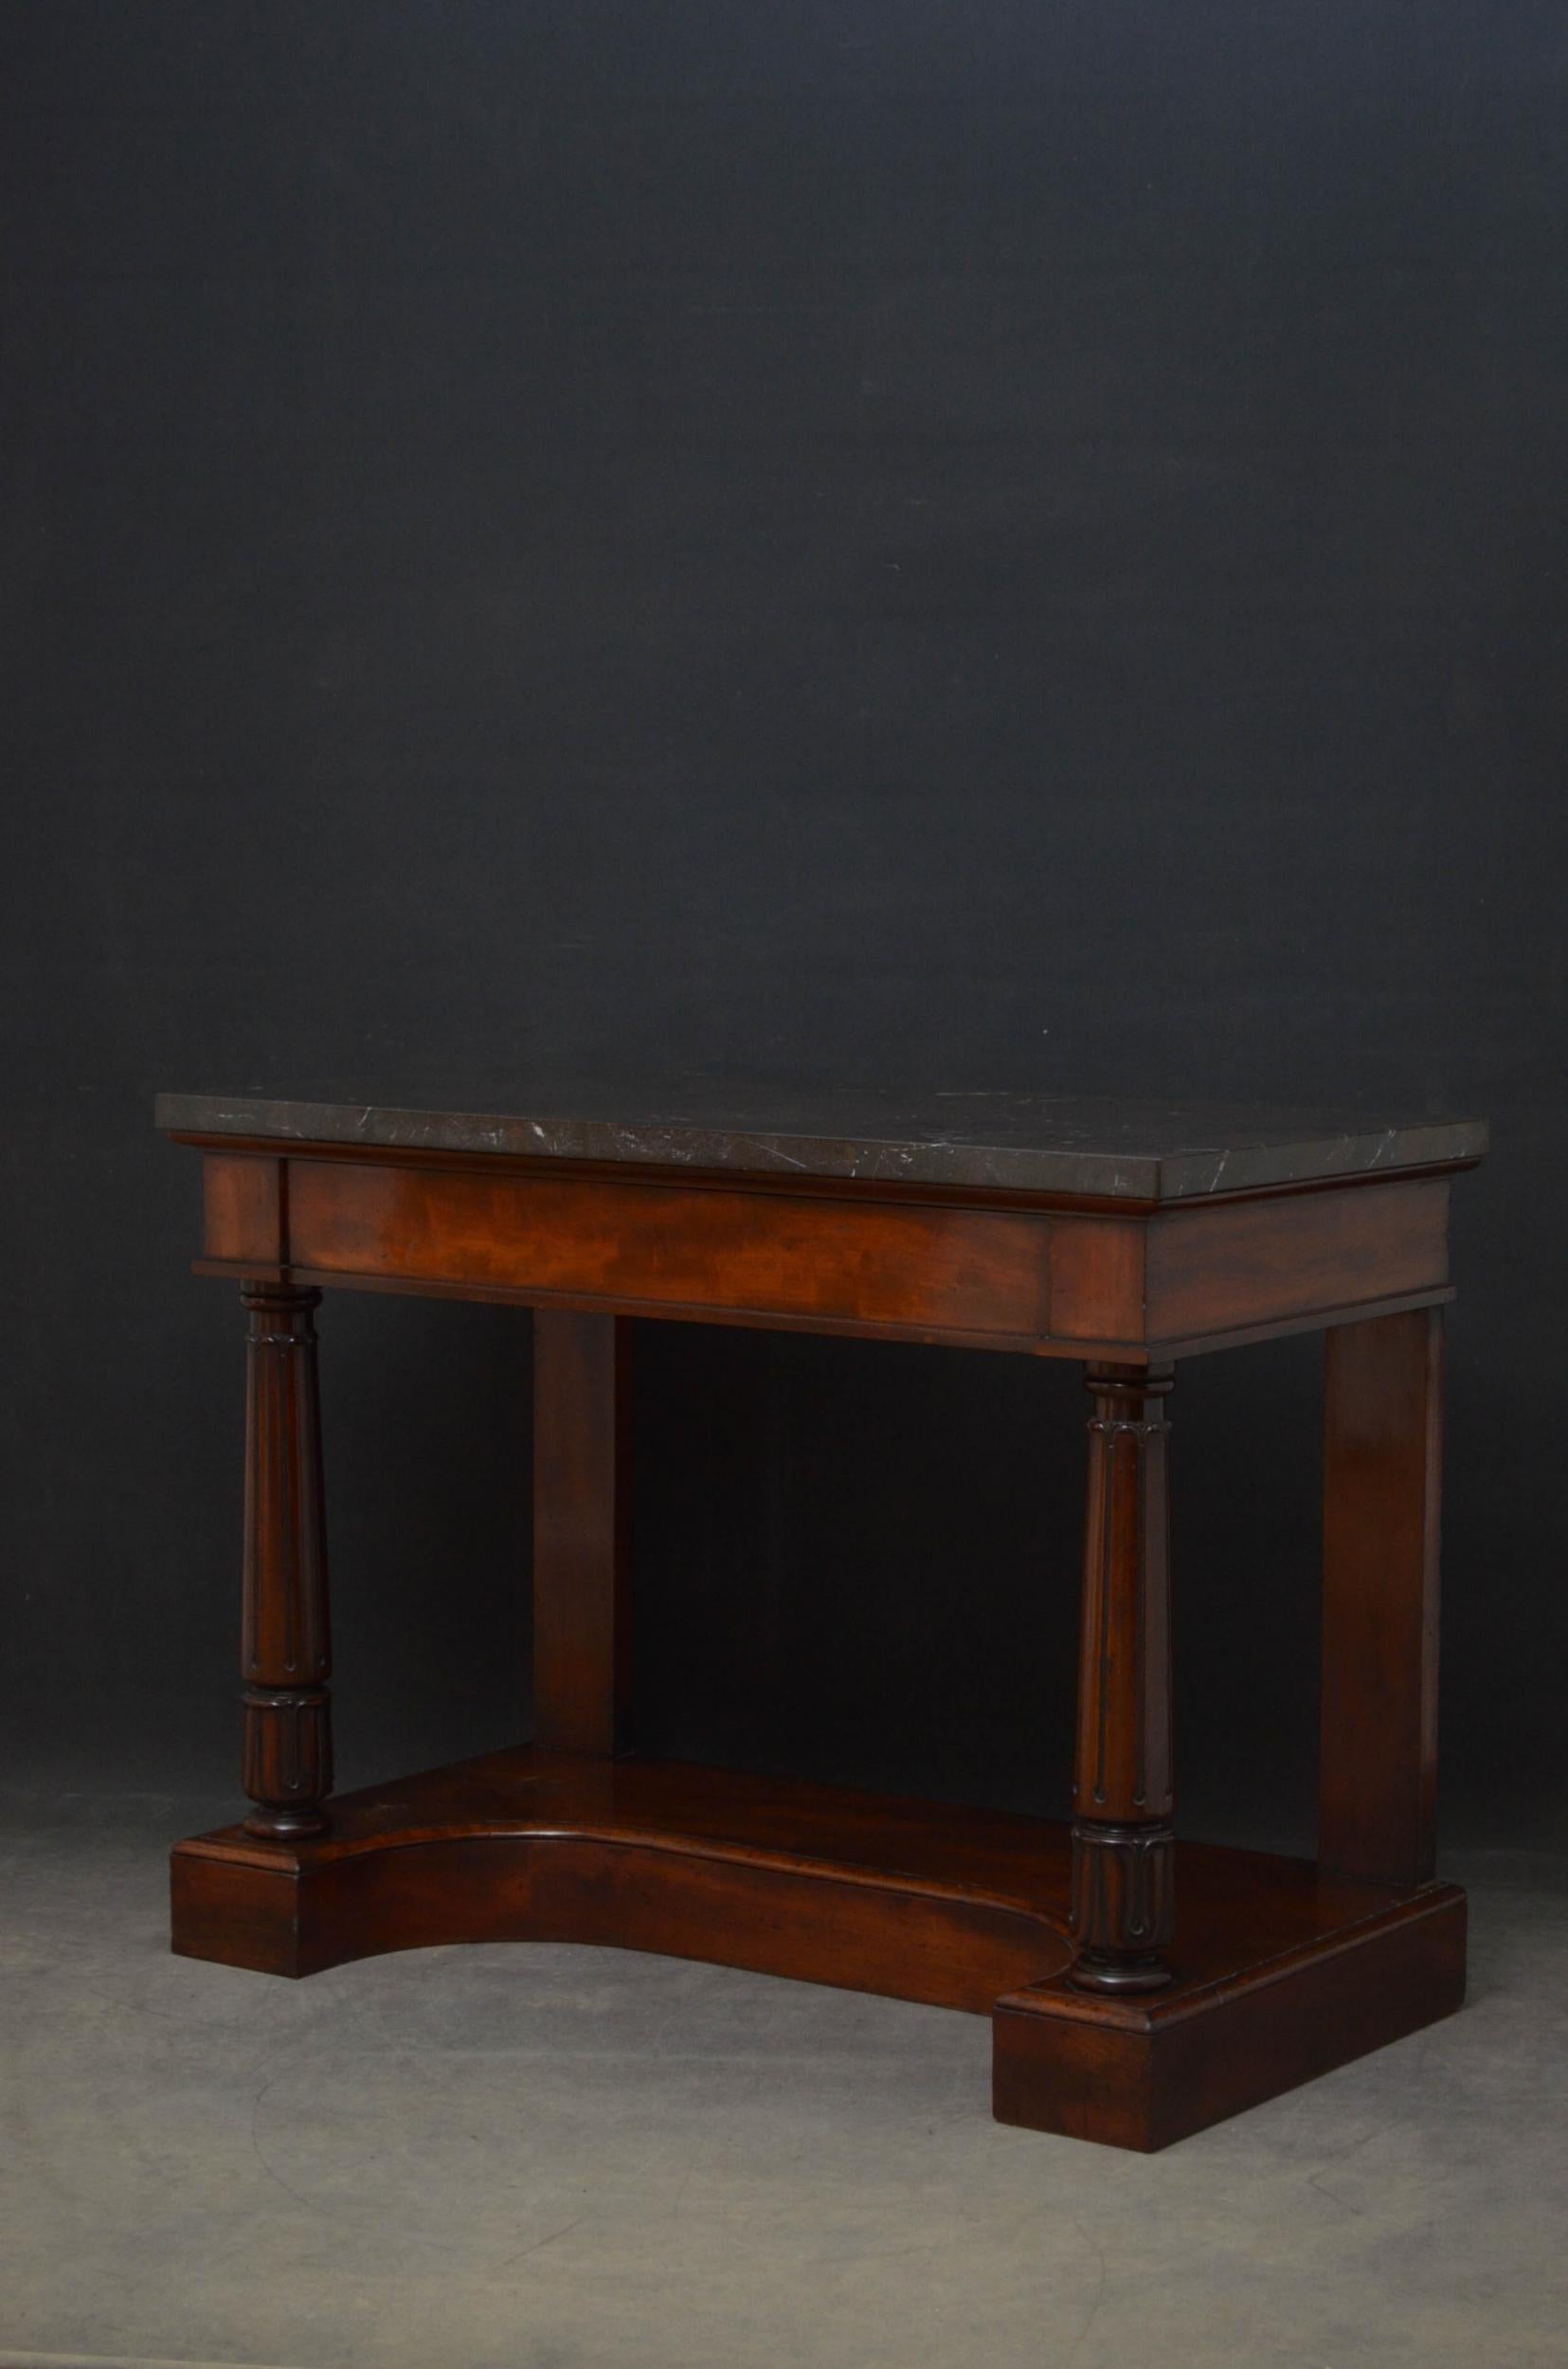 Sn4791 Superb William IV hall table in mahogany, having very attractive granite top above a figured mahogany frieze enclosing a mahogany lined drawer, standing on tapering carved columns with tulip carved capitals terminating in figured mahogany